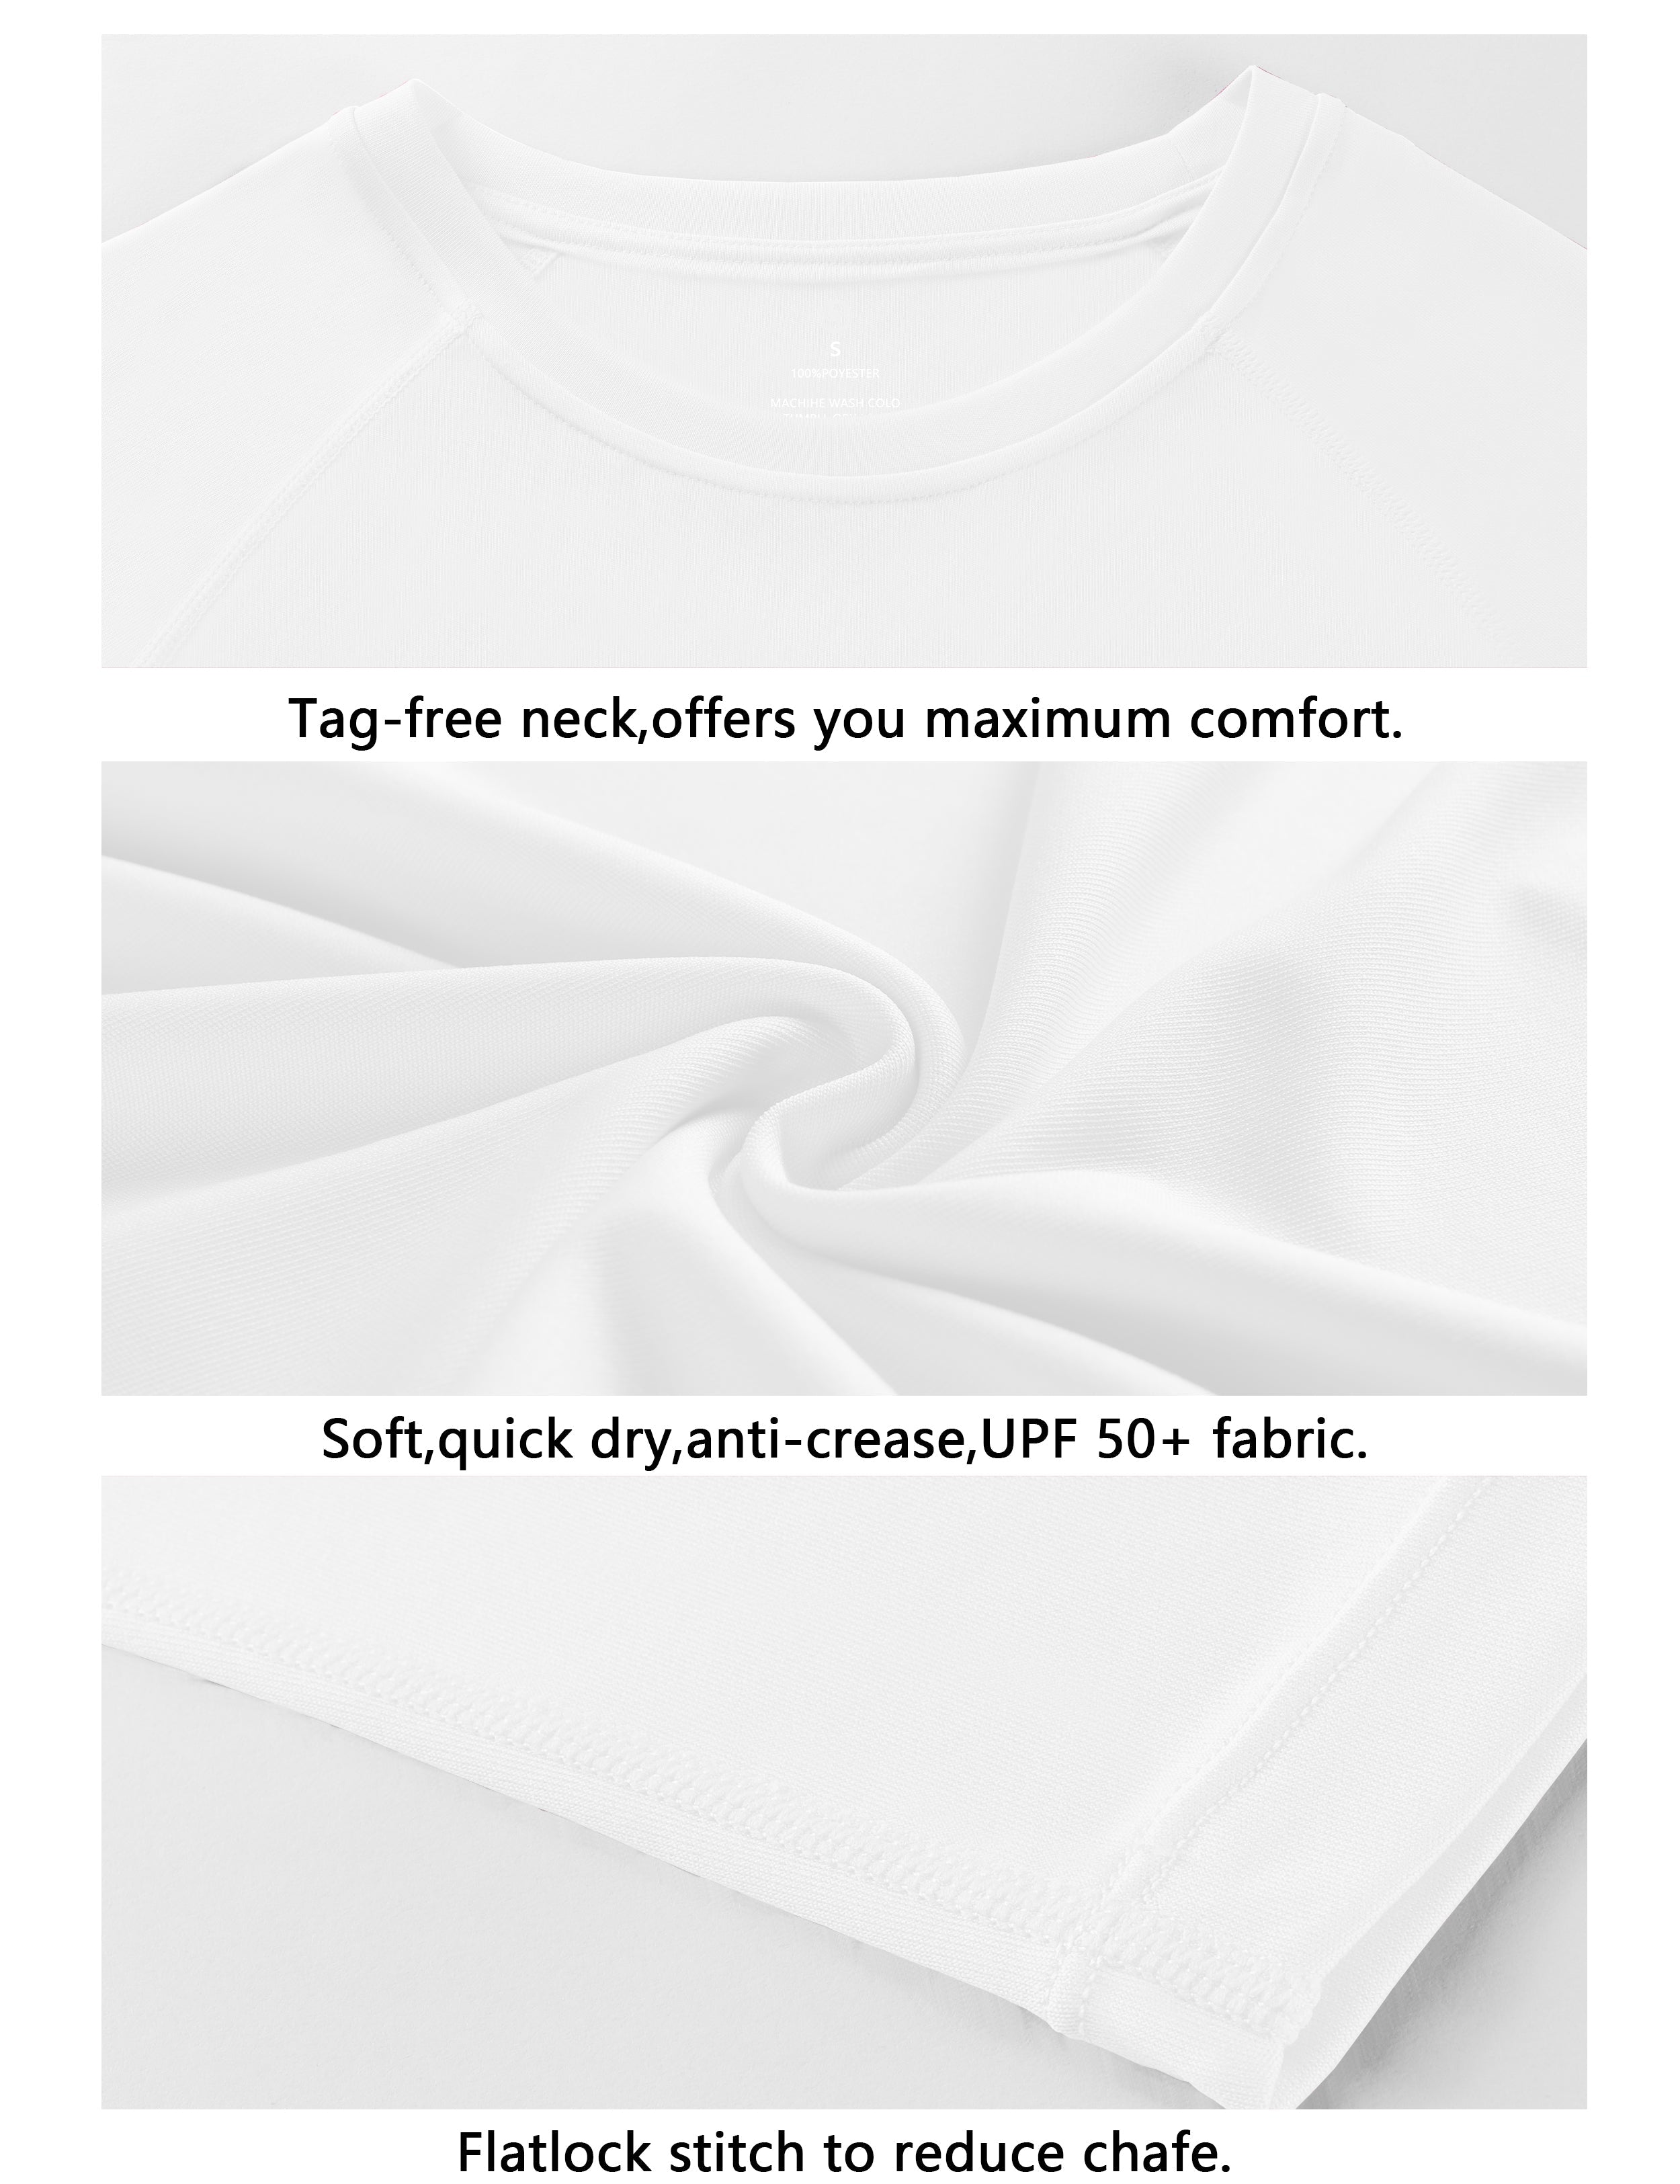 Long Sleeve Athletic Shirts white 100% polyester Lightweight Slim Fit UPF 50+ blocks sun's harmful rays Treated to wick moisture, dries ultra-fast